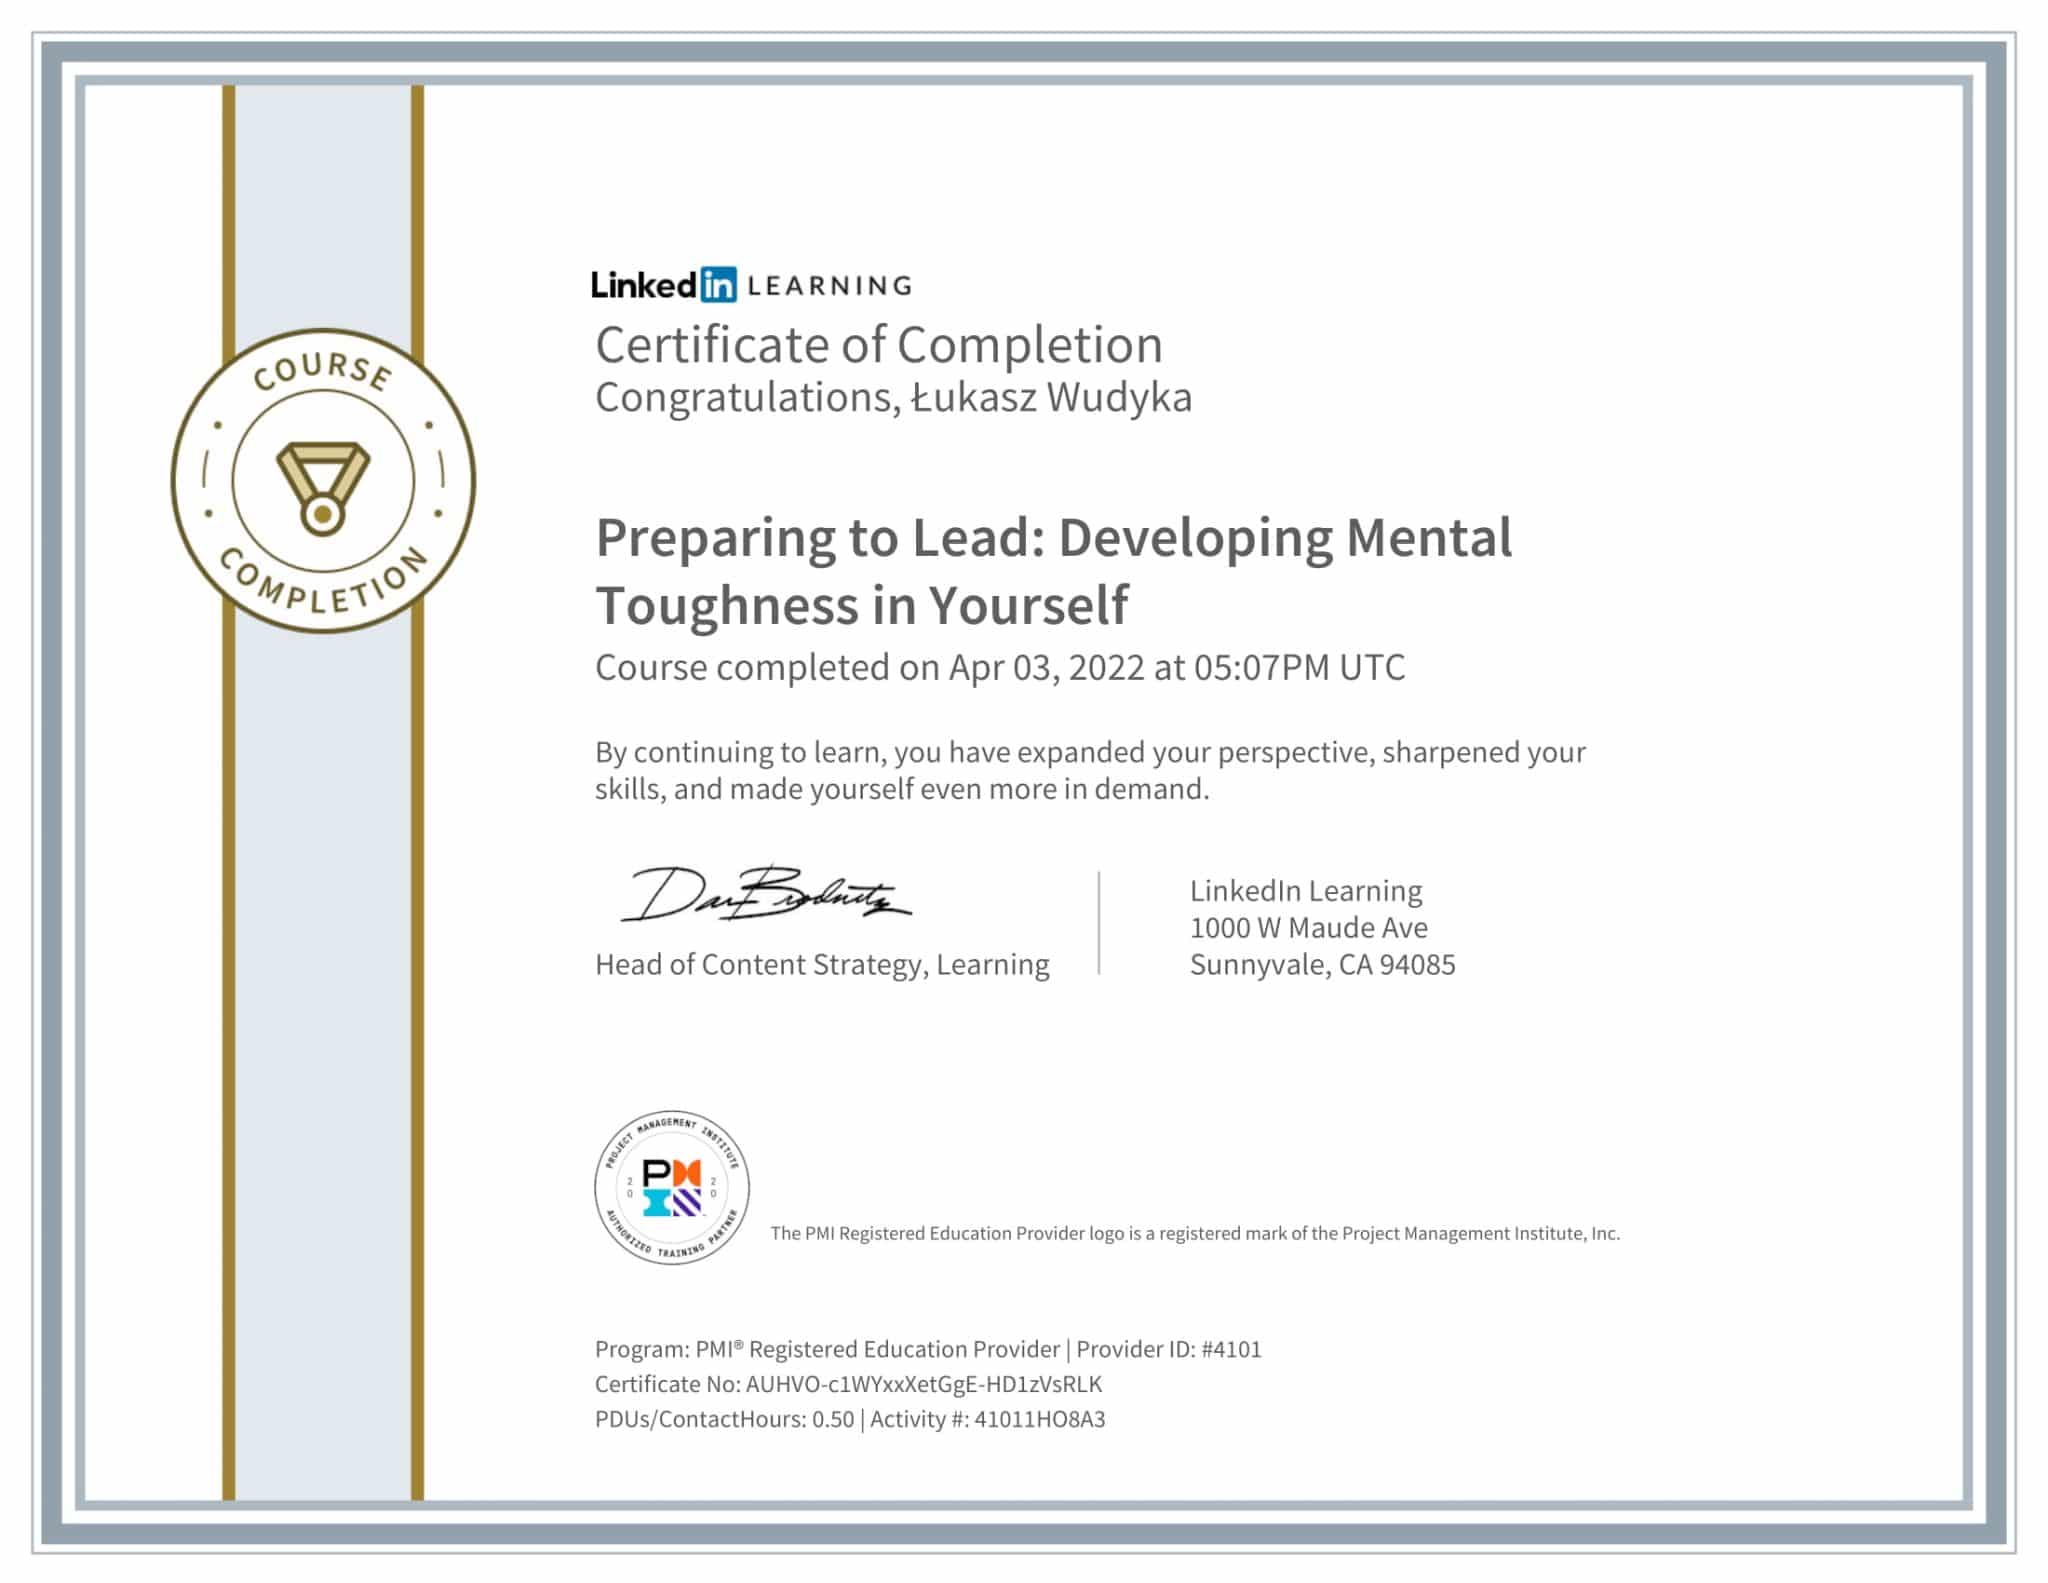 CertificateOfCompletion_Preparing to Lead Developing Mental Toughness in Yourself-1